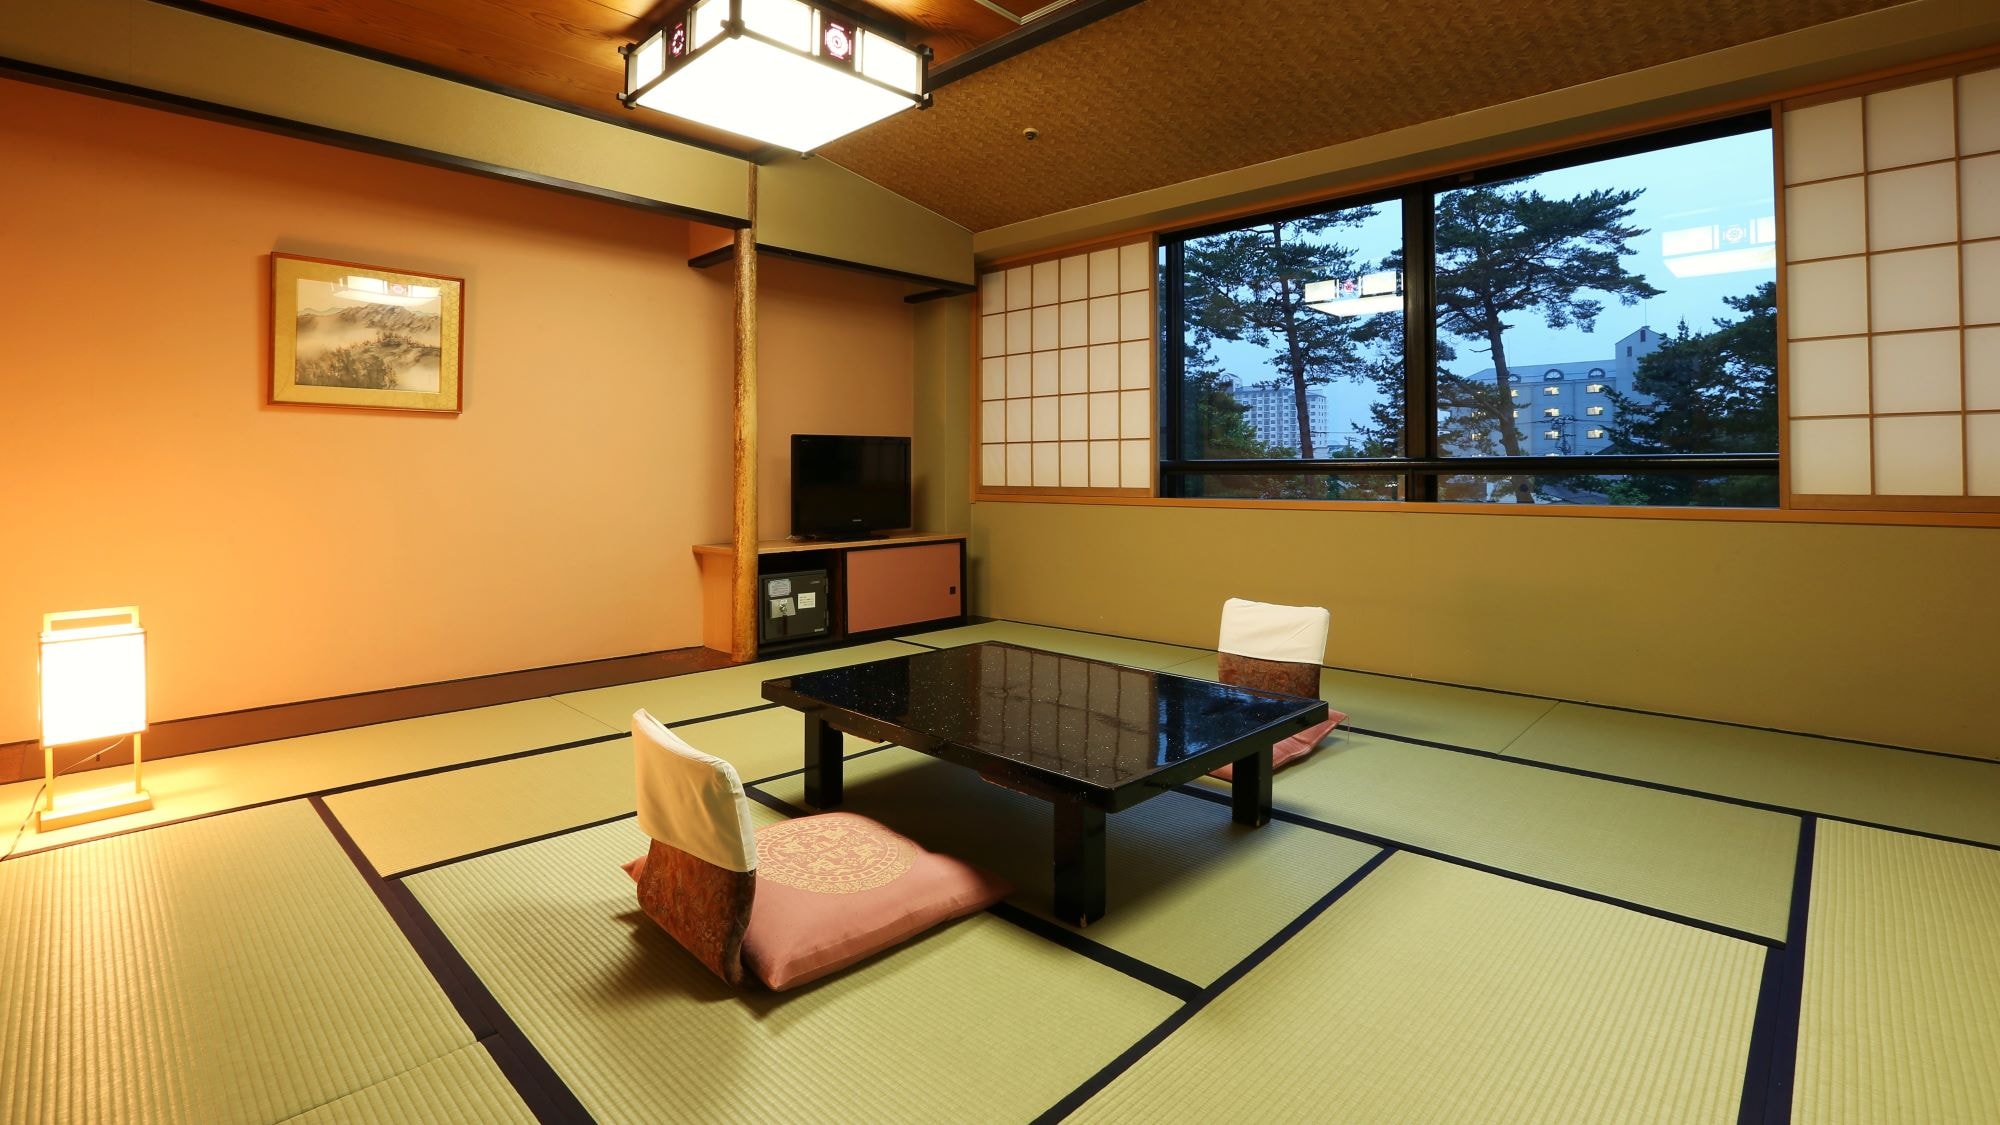 Main guest hall/Japanese-style room next floor plan *Example